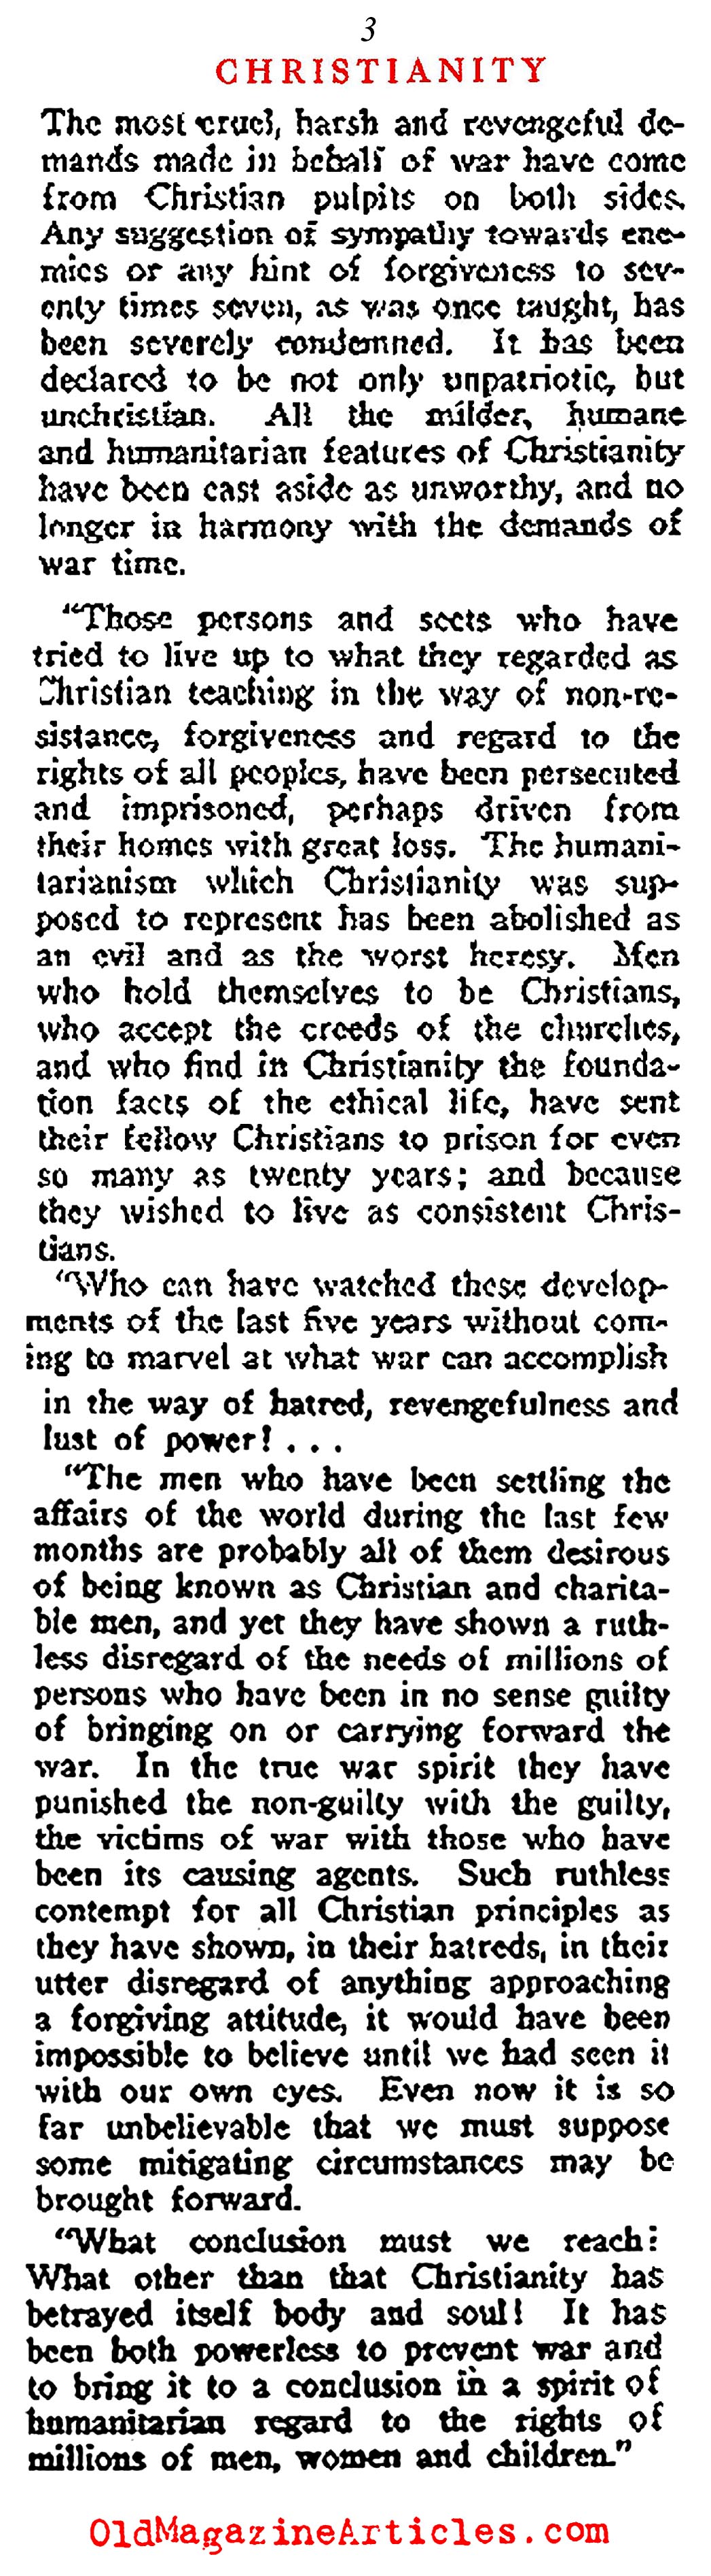 In the War's Aftermath Came Spiritual Disillusion (Current Opinion Magazine, 1919)